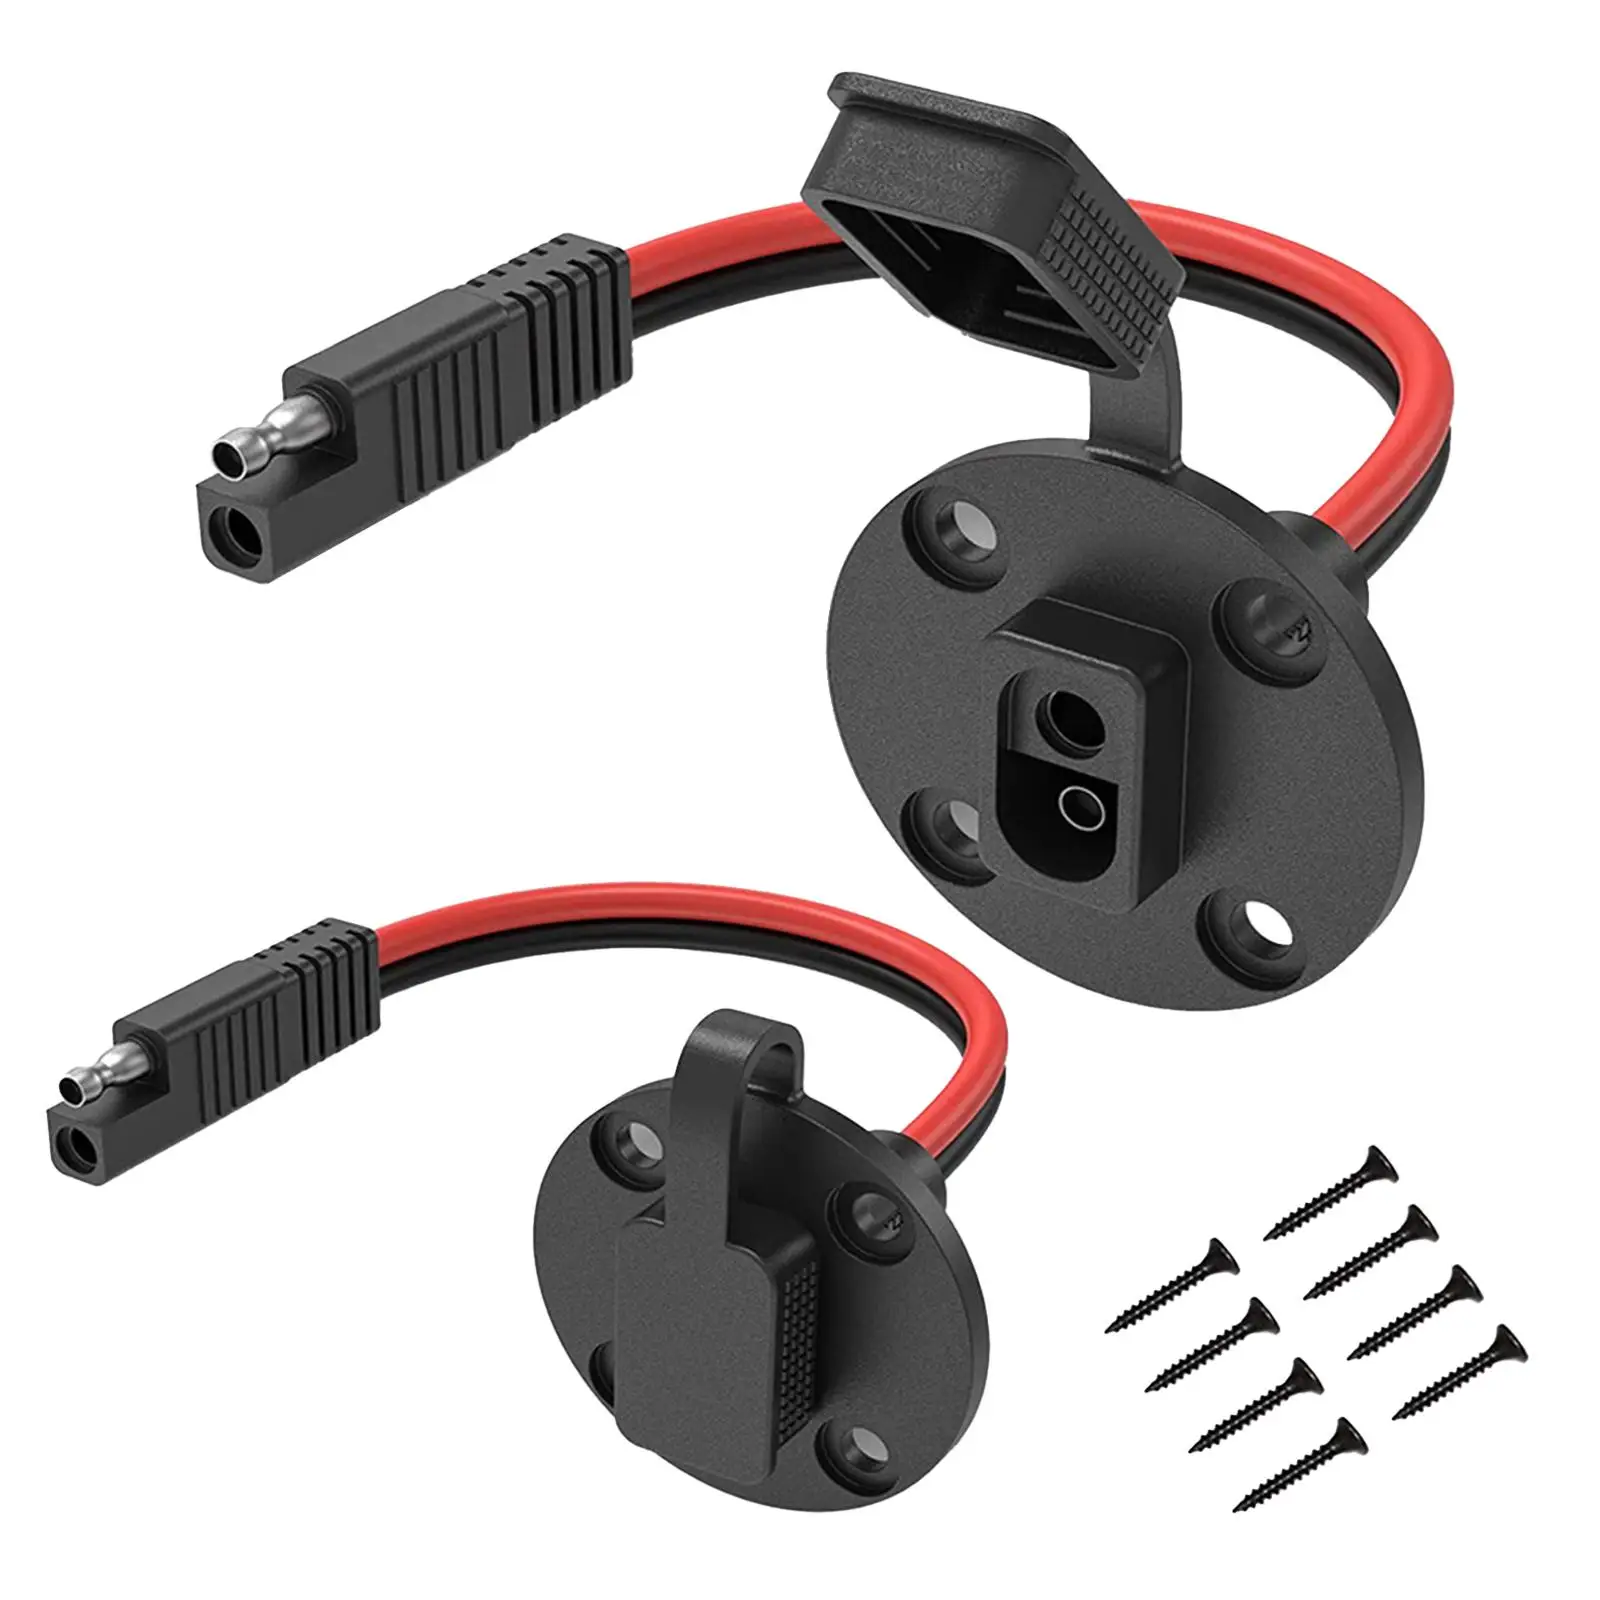 2Pcs SAE Socket DC Power Automotive Waterproof Cap Tractor Harness Extension Cord SAE Battery Connector SAE Plug Charging Cable